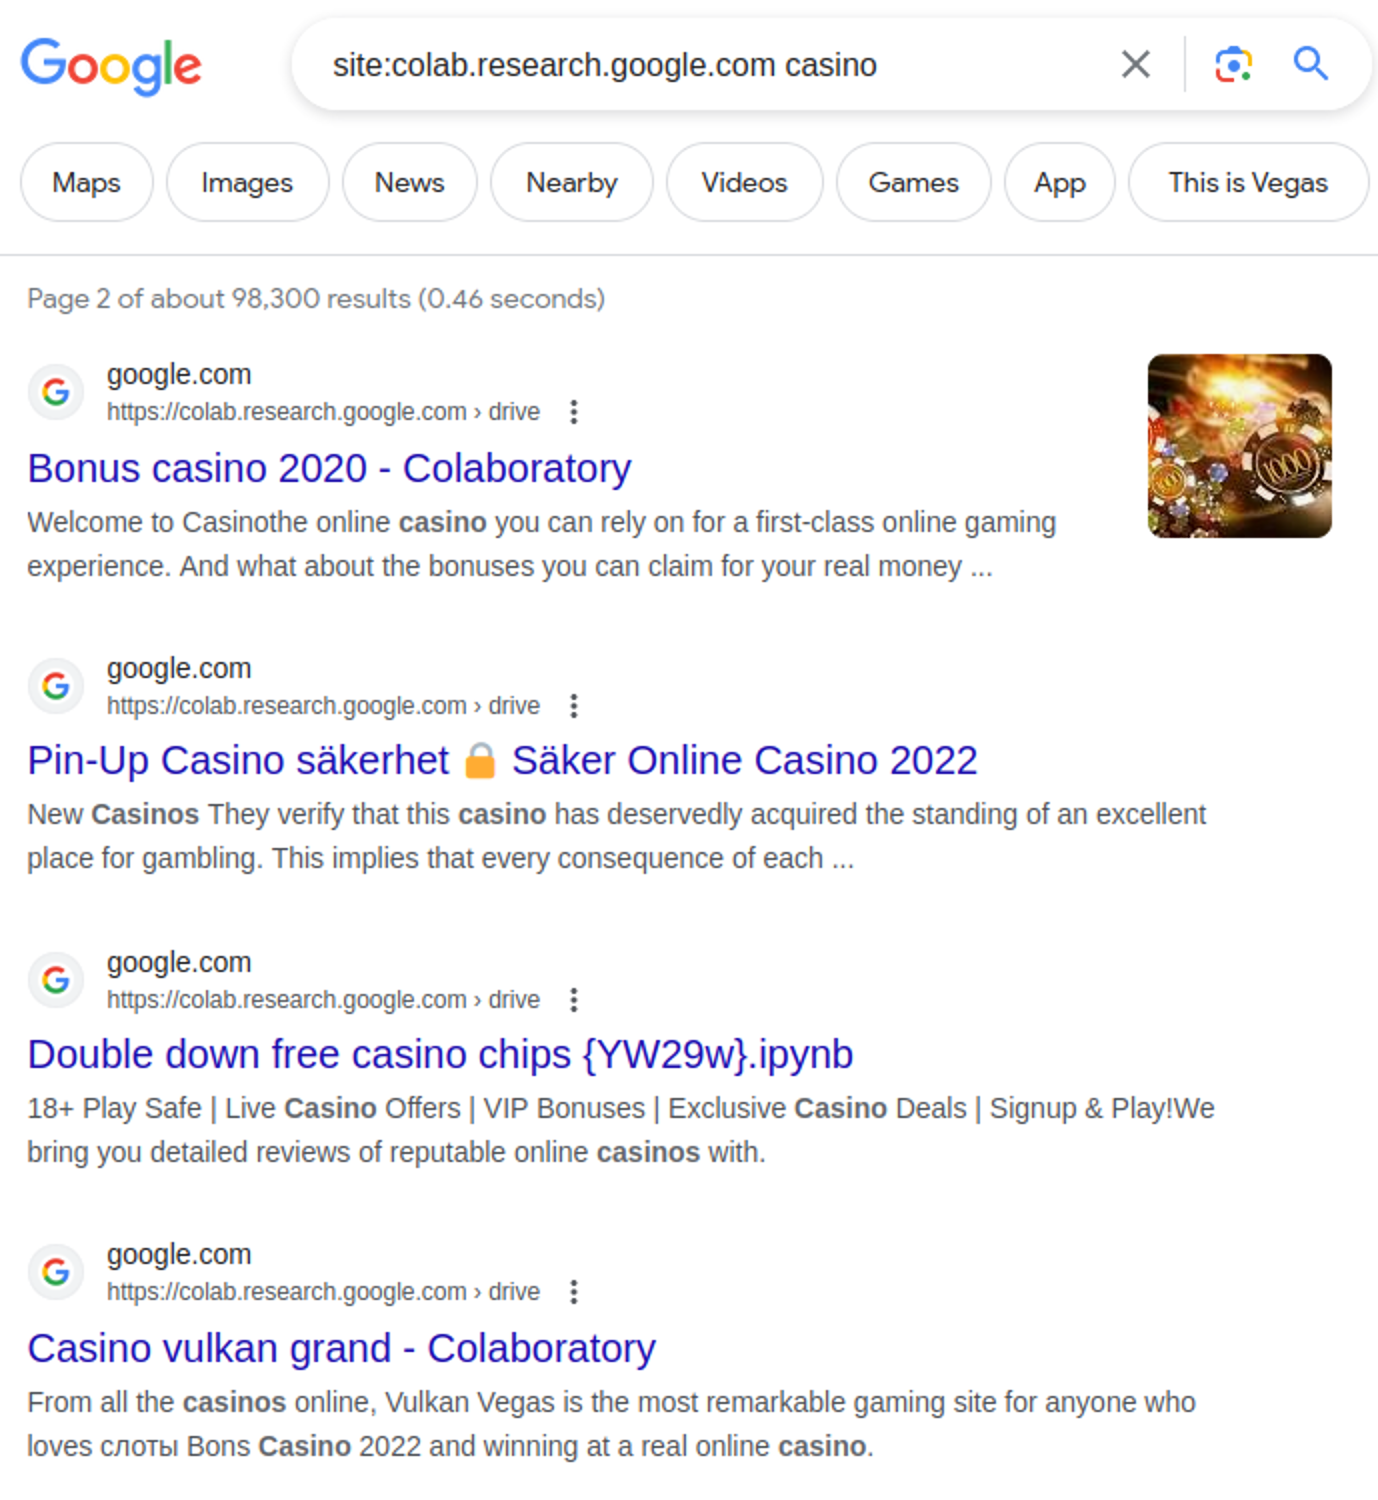 casino keyword in 100,000 Google Colaboratory pages, most of which are spam